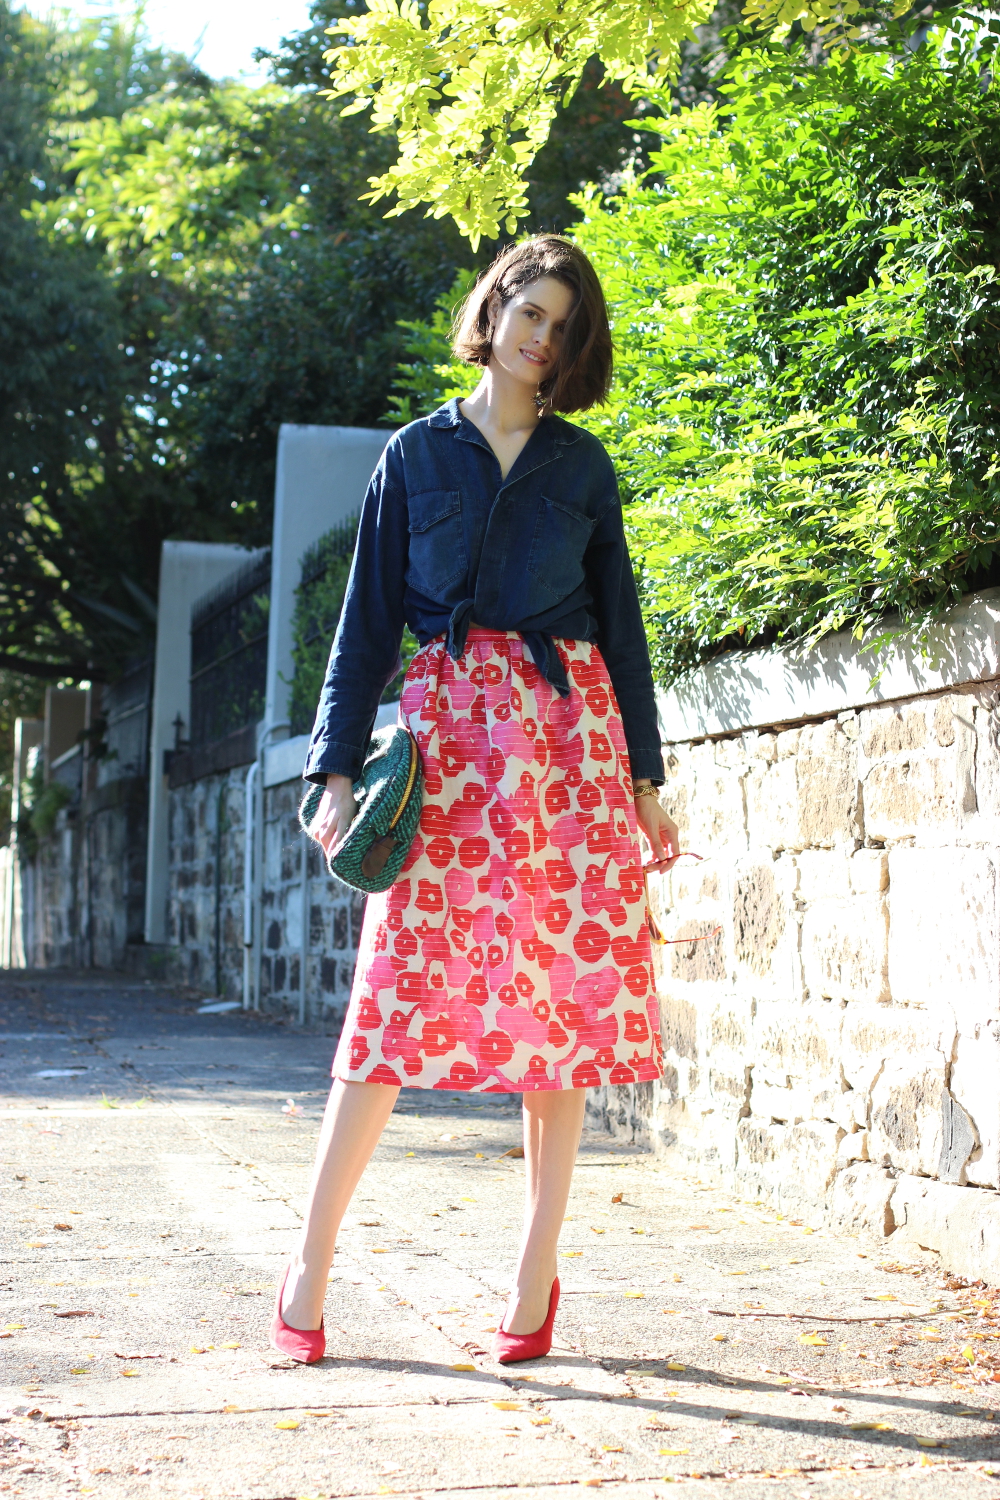 BY CHILL FASHION | Max Mara red and pink Printed Crepe de Chine skirt, Band of Outsiders denim skirt adn Miu miu red suede heels